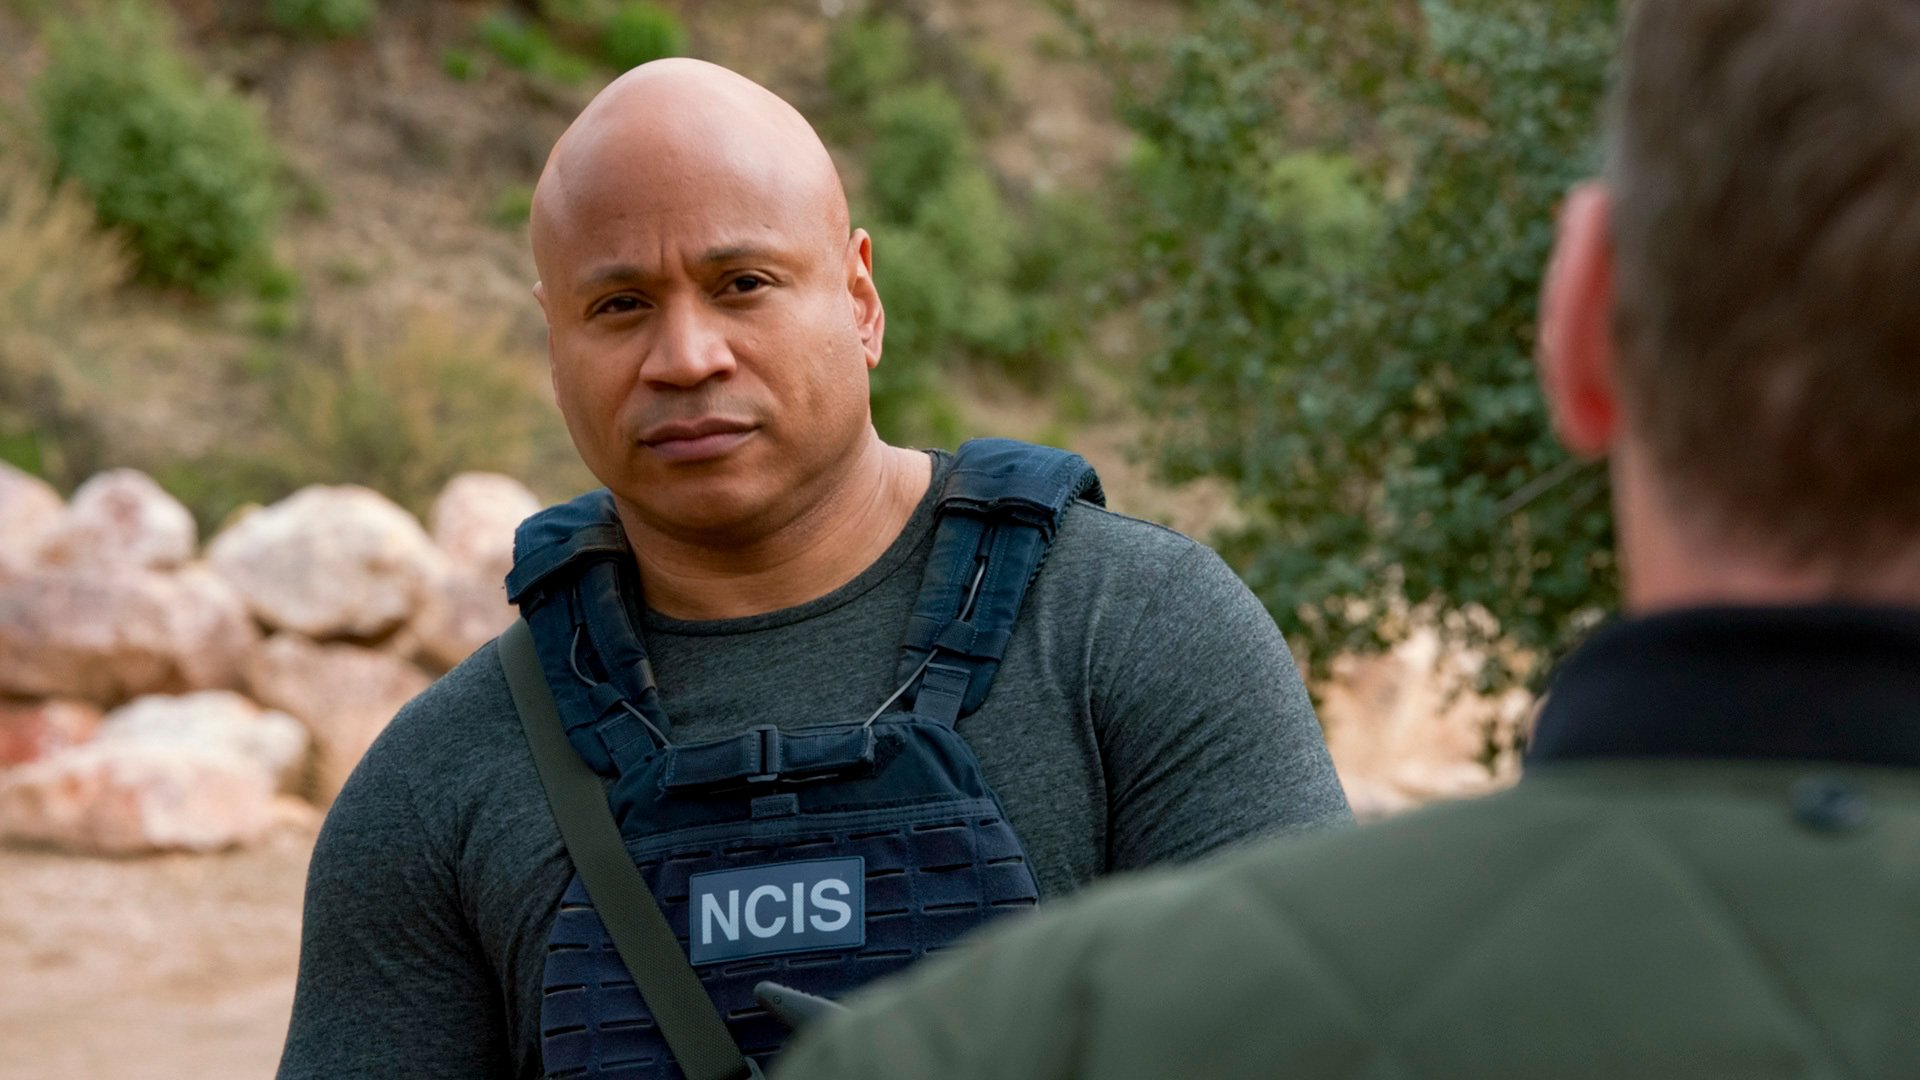 LL Cool J wears the NCIS uniform while talking to someone in the desert.